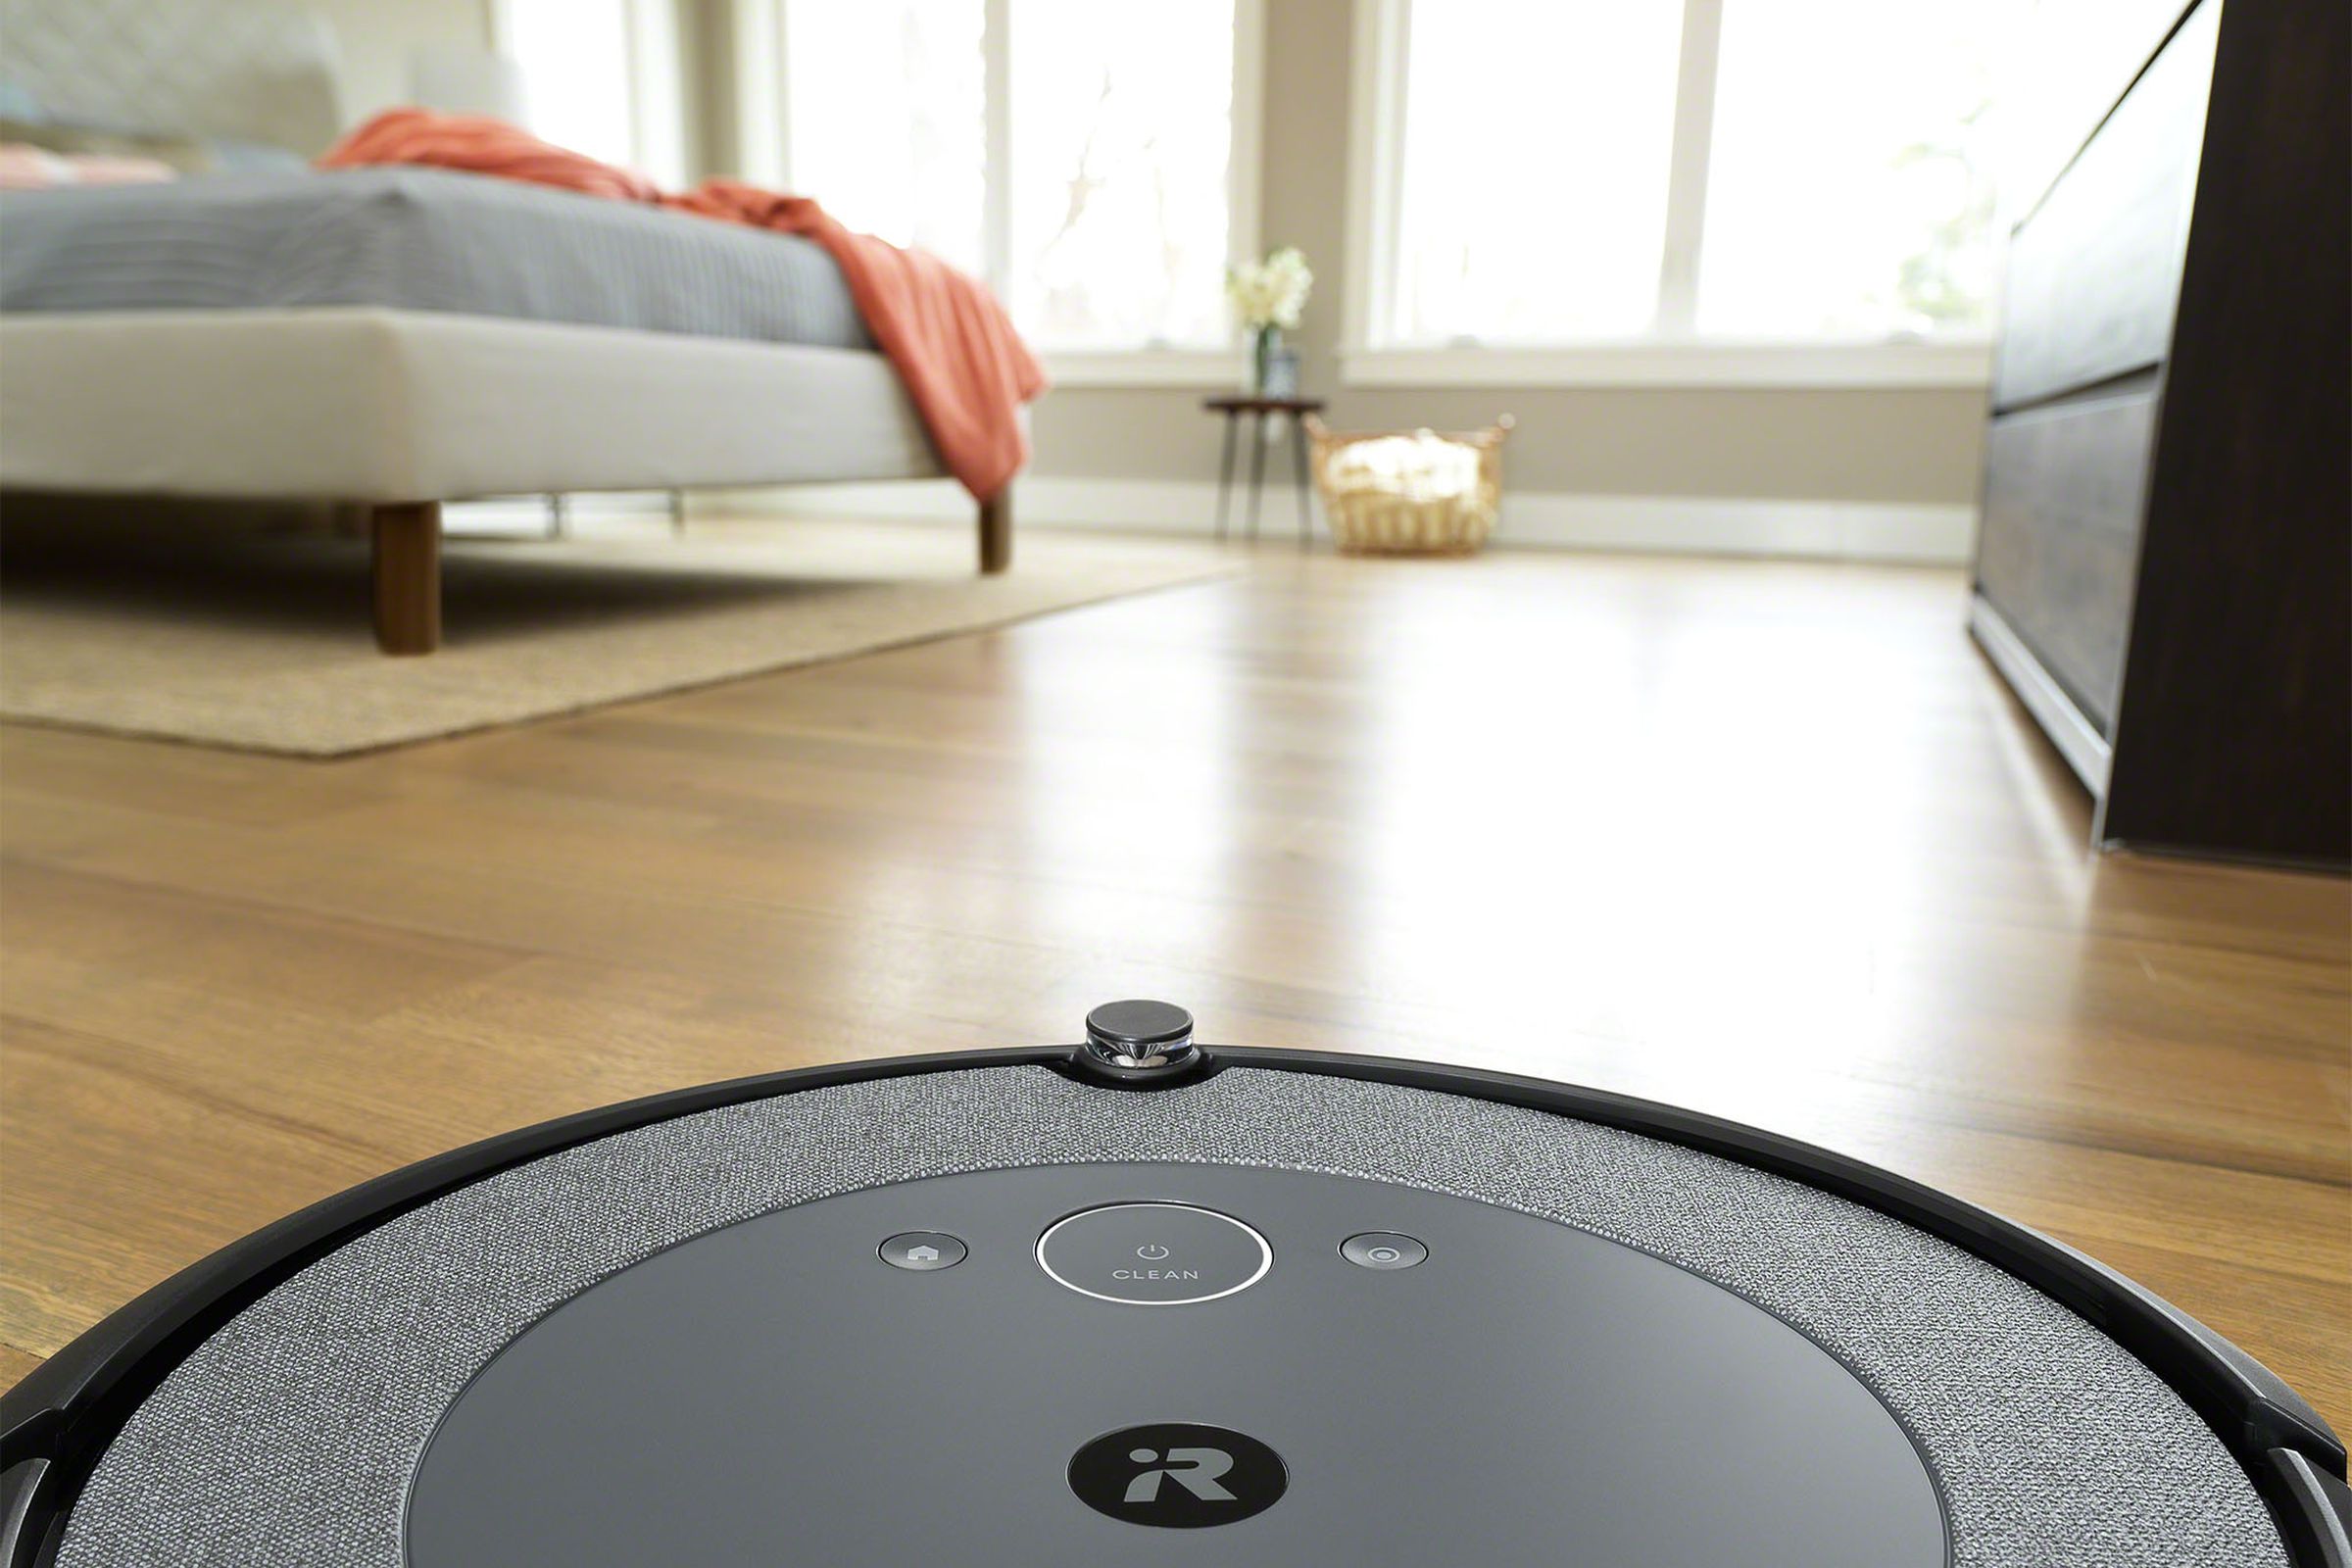 The Roomba i3 doesn’t feature an auto-empty base, but that shouldn’t be a deal breaker.